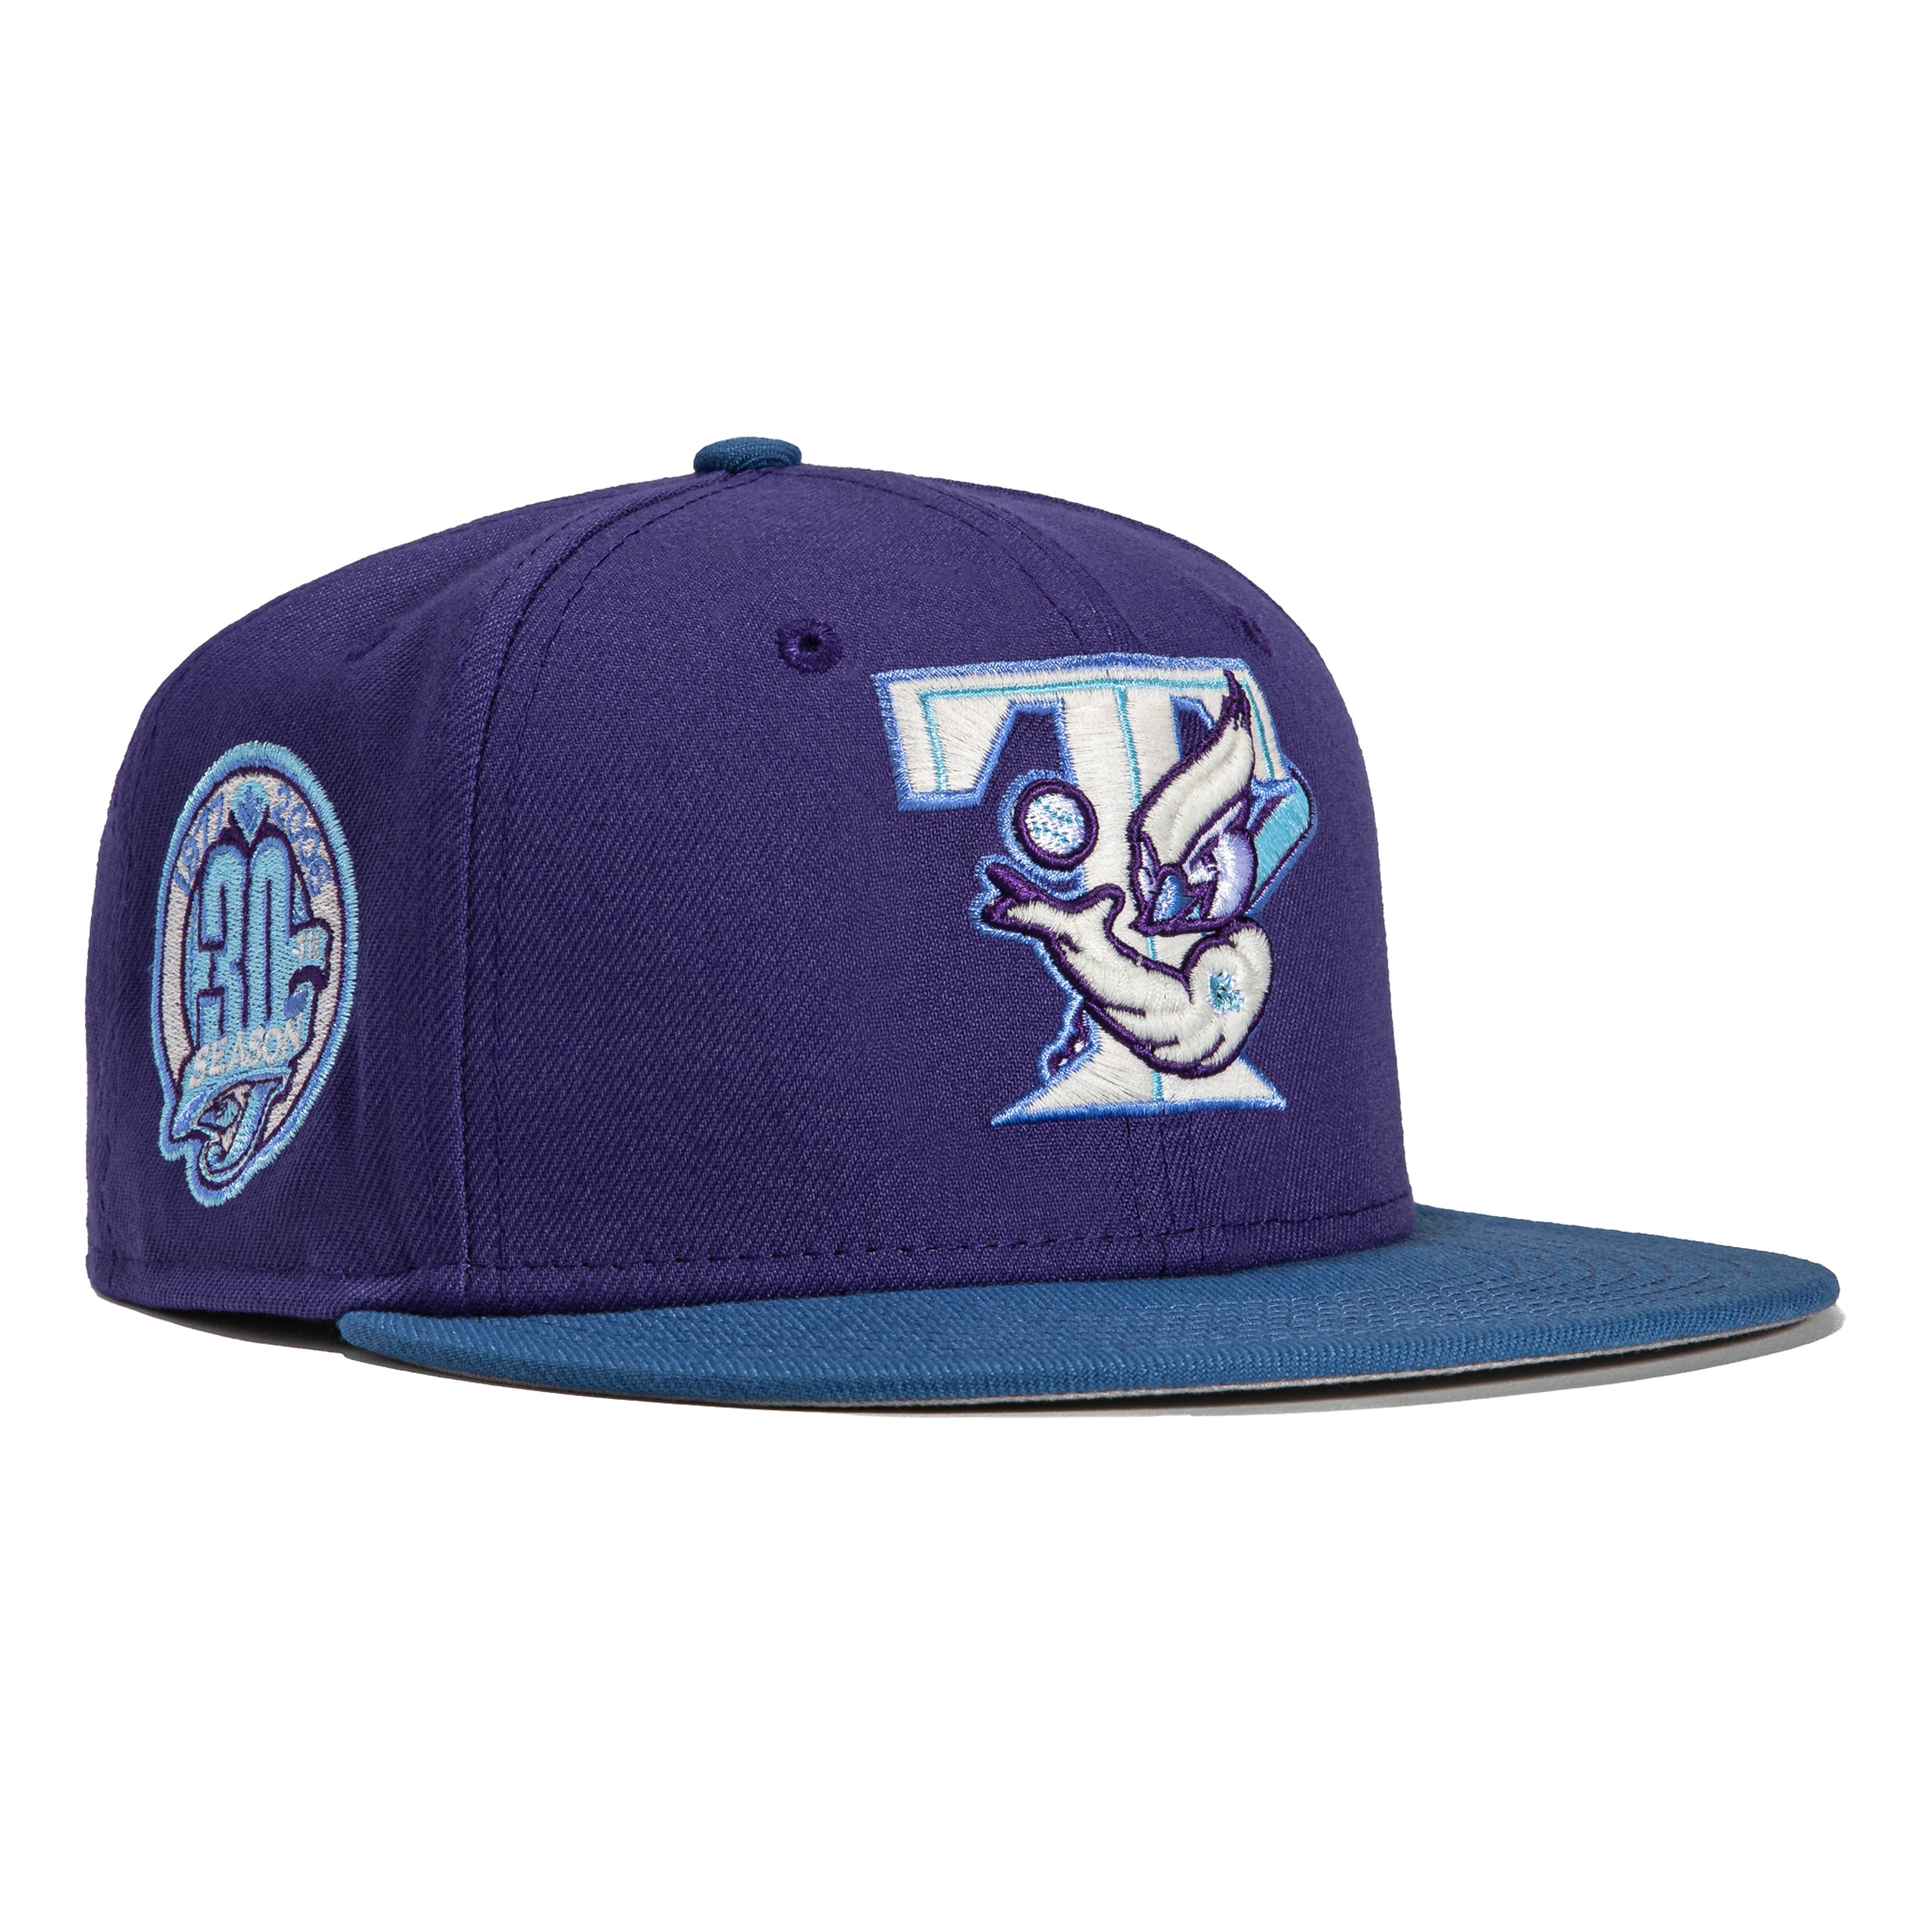 Cookies N Cream 59Fifty Fitted Hat Collection by MLB x New Era